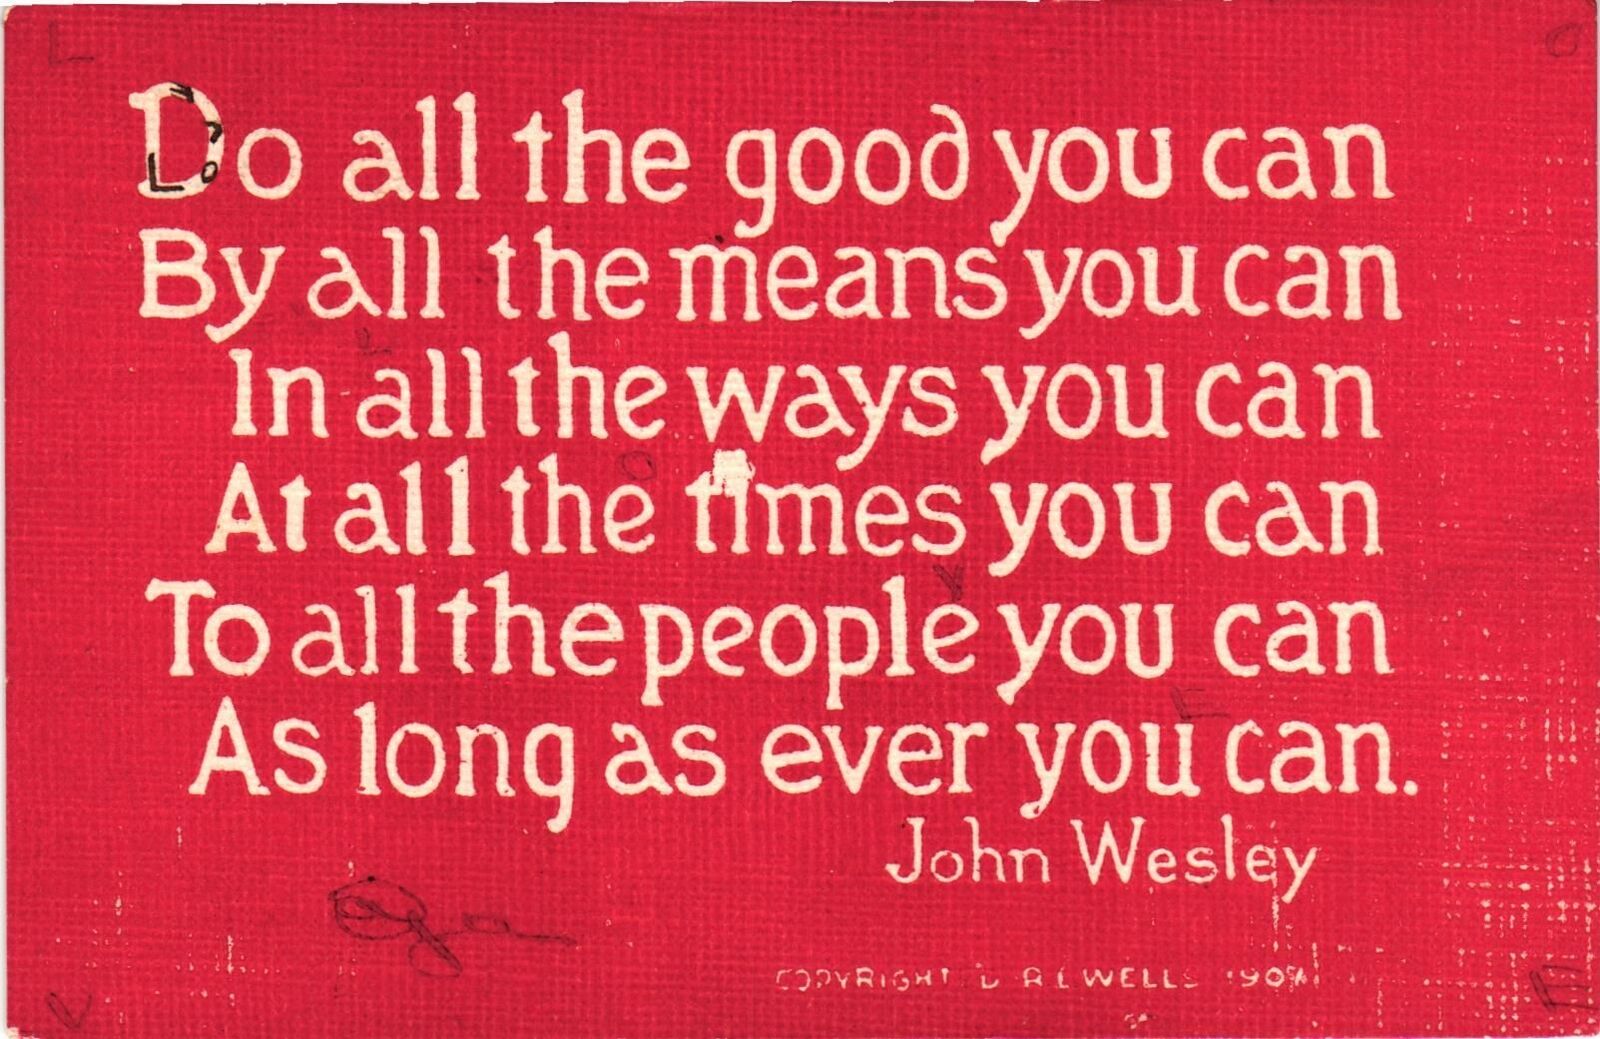 Vintage Postcard- Do all the good you can